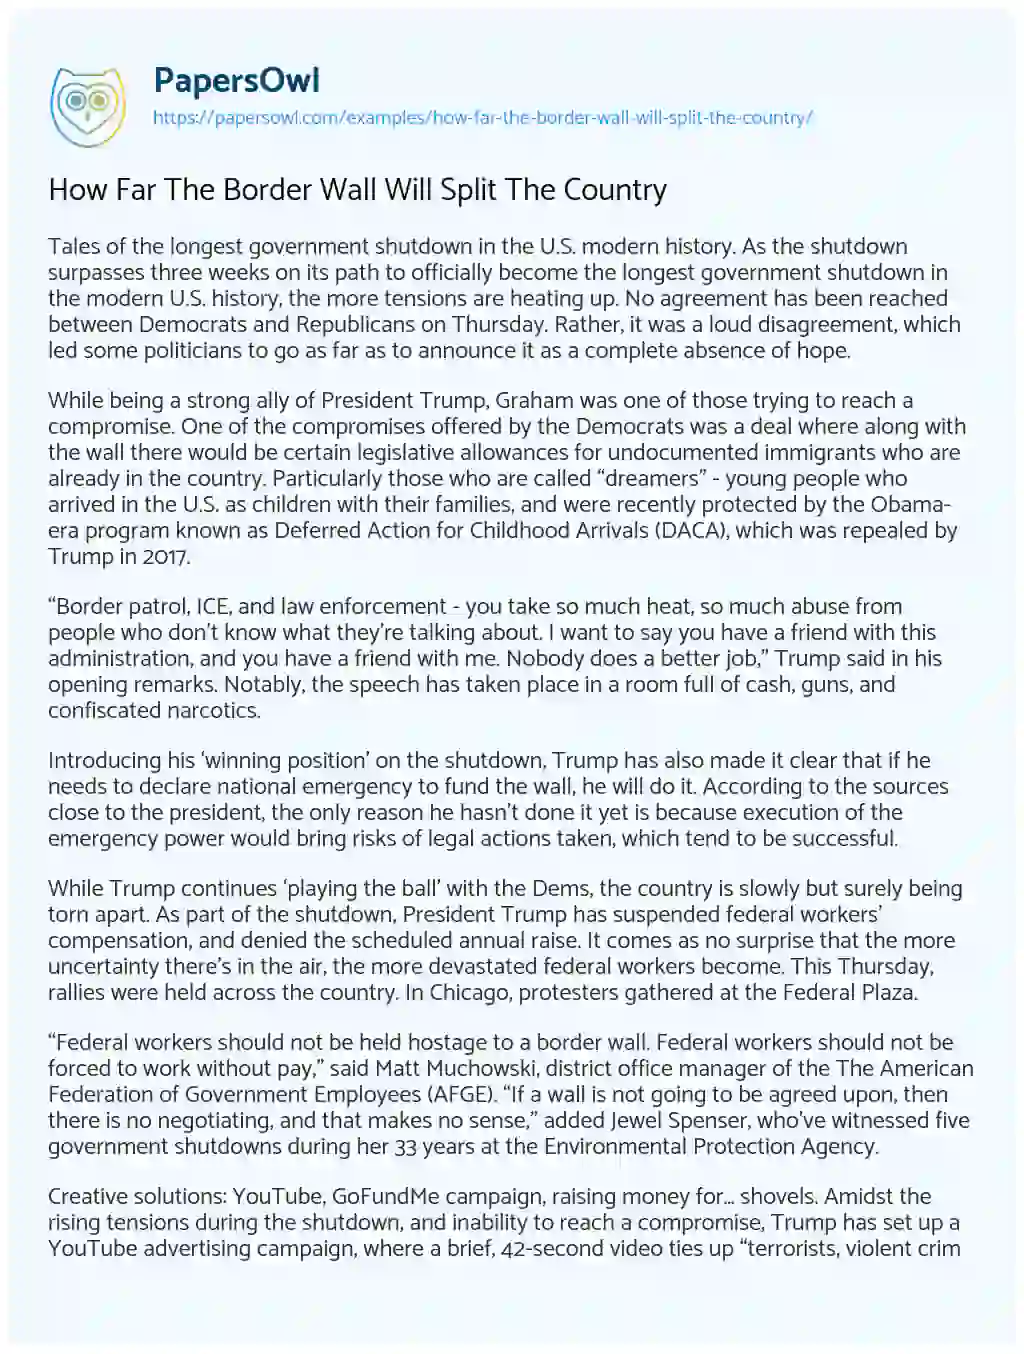 Essay on How Far the Border Wall Will Split the Country